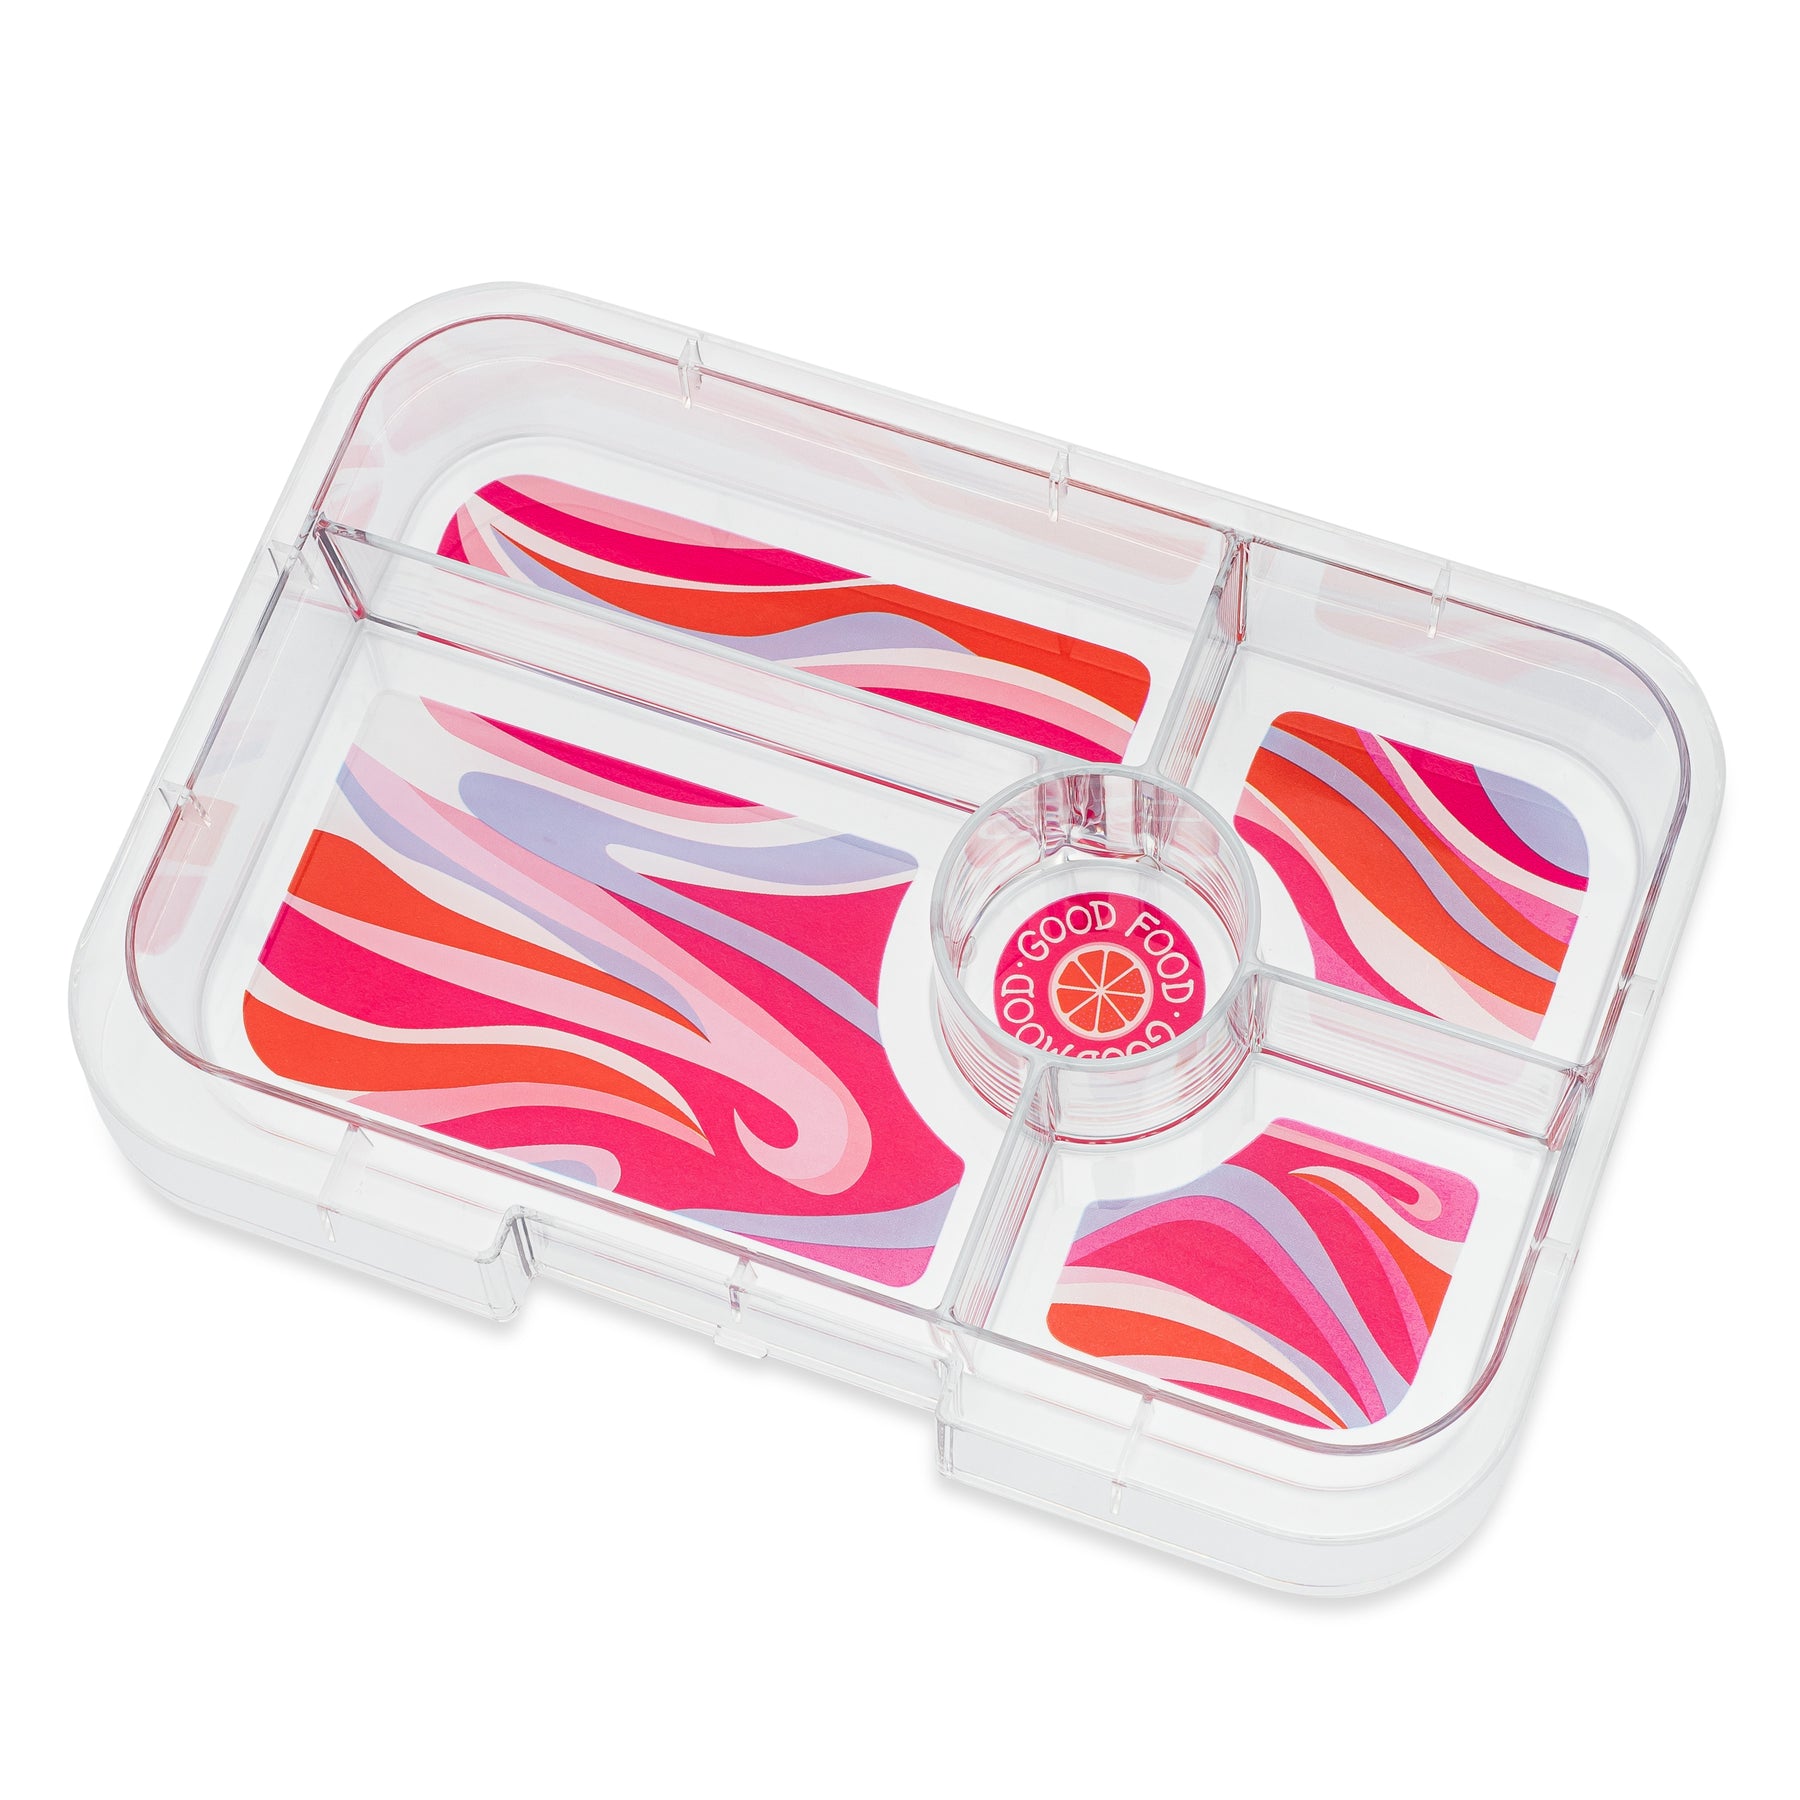 Yumbox Tapas Leakproof Bento Lunch Box - 5-Compartment Bento Container for  Adults and Kids; Large Size 9.5x6.9x1.8; BPA-Free, Leakproof & Easy Clean;